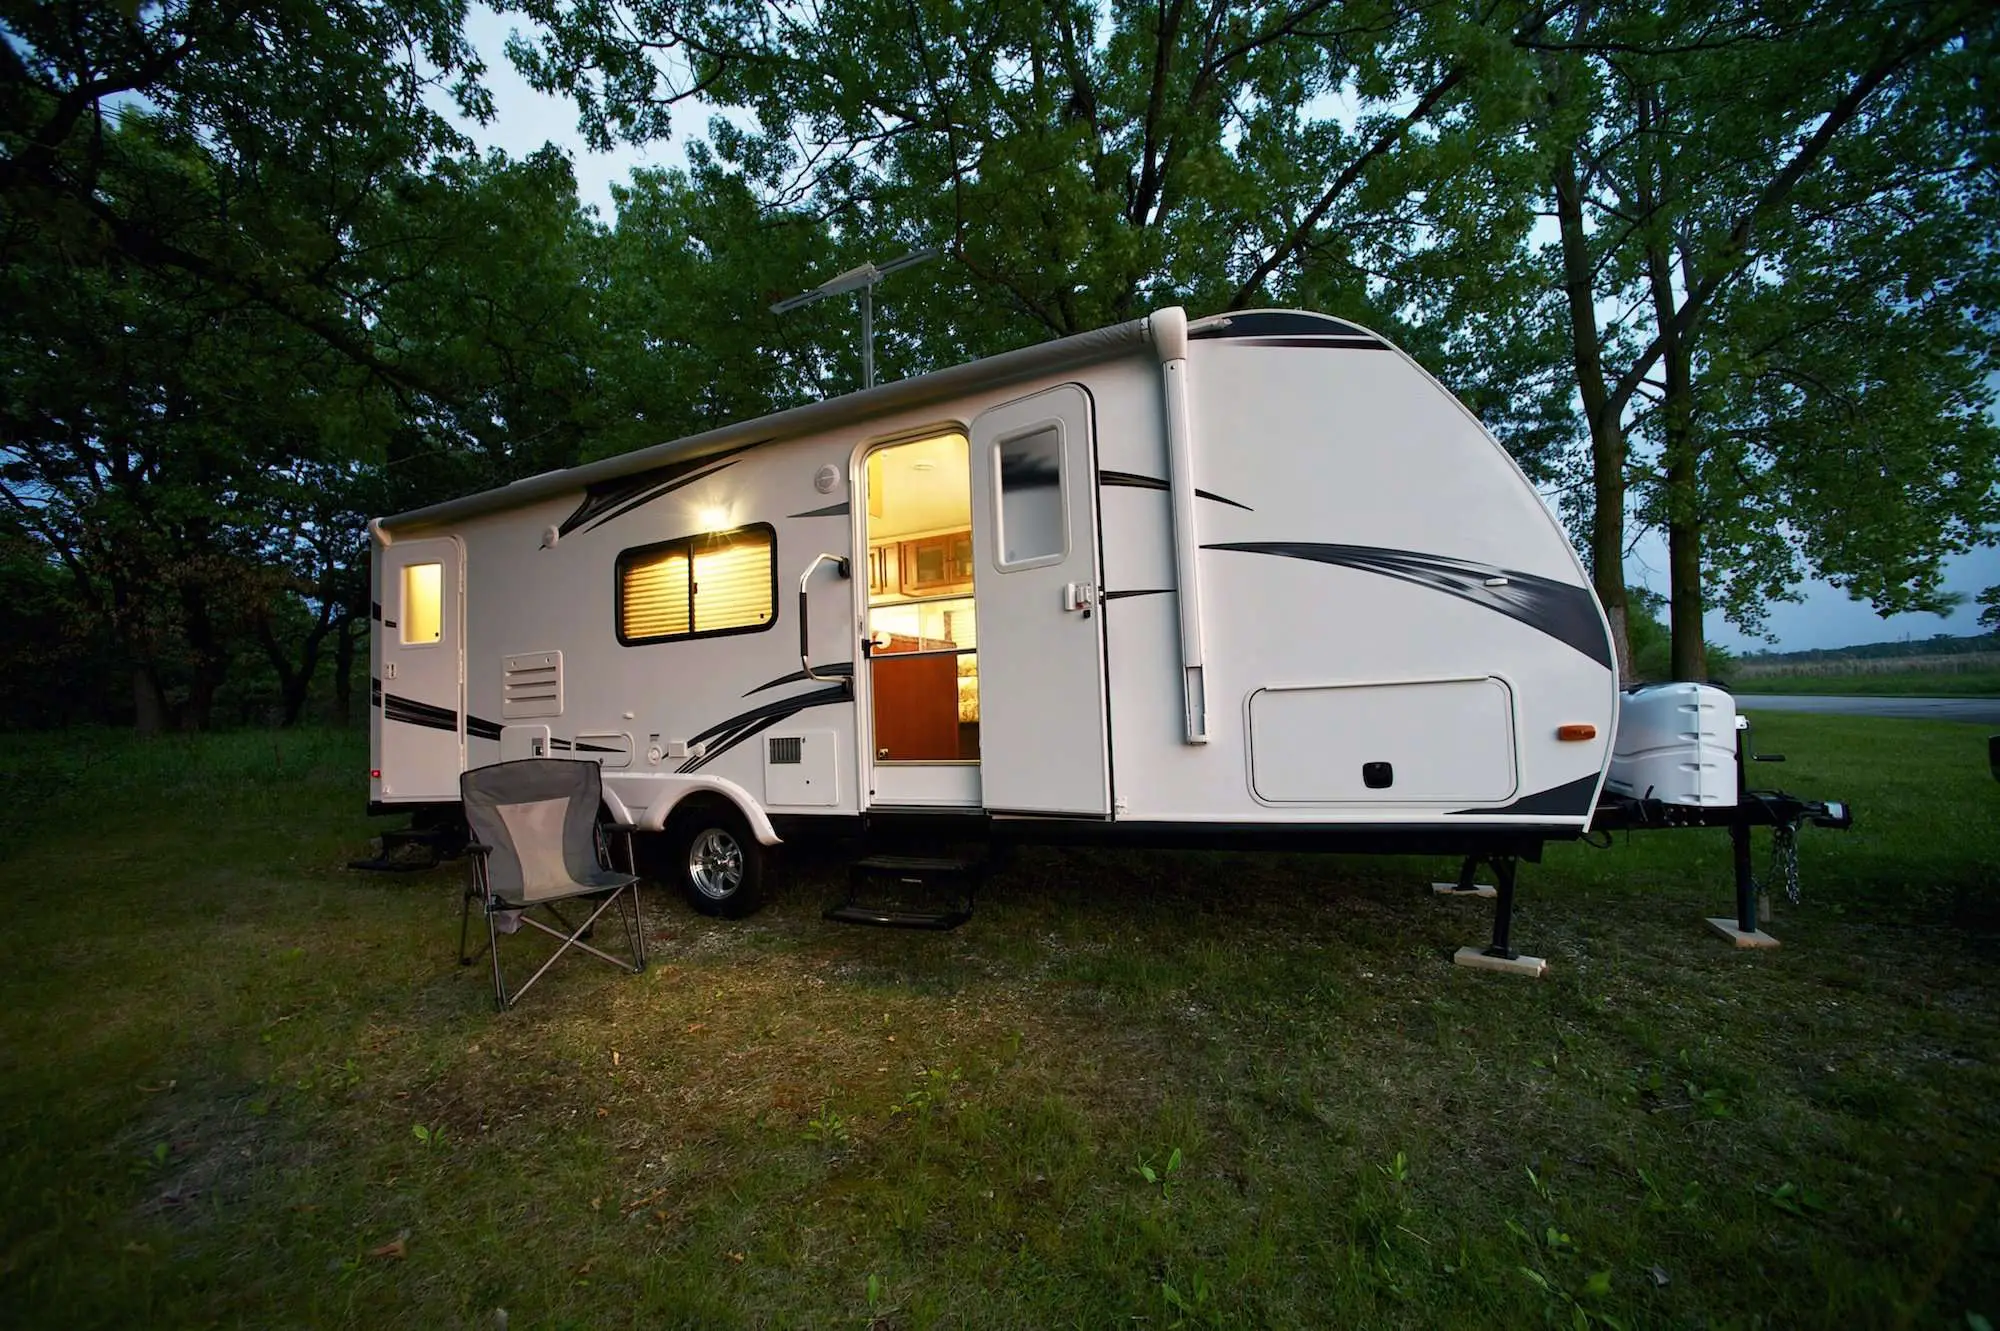 How Long Can You Finance A Rv Trailer